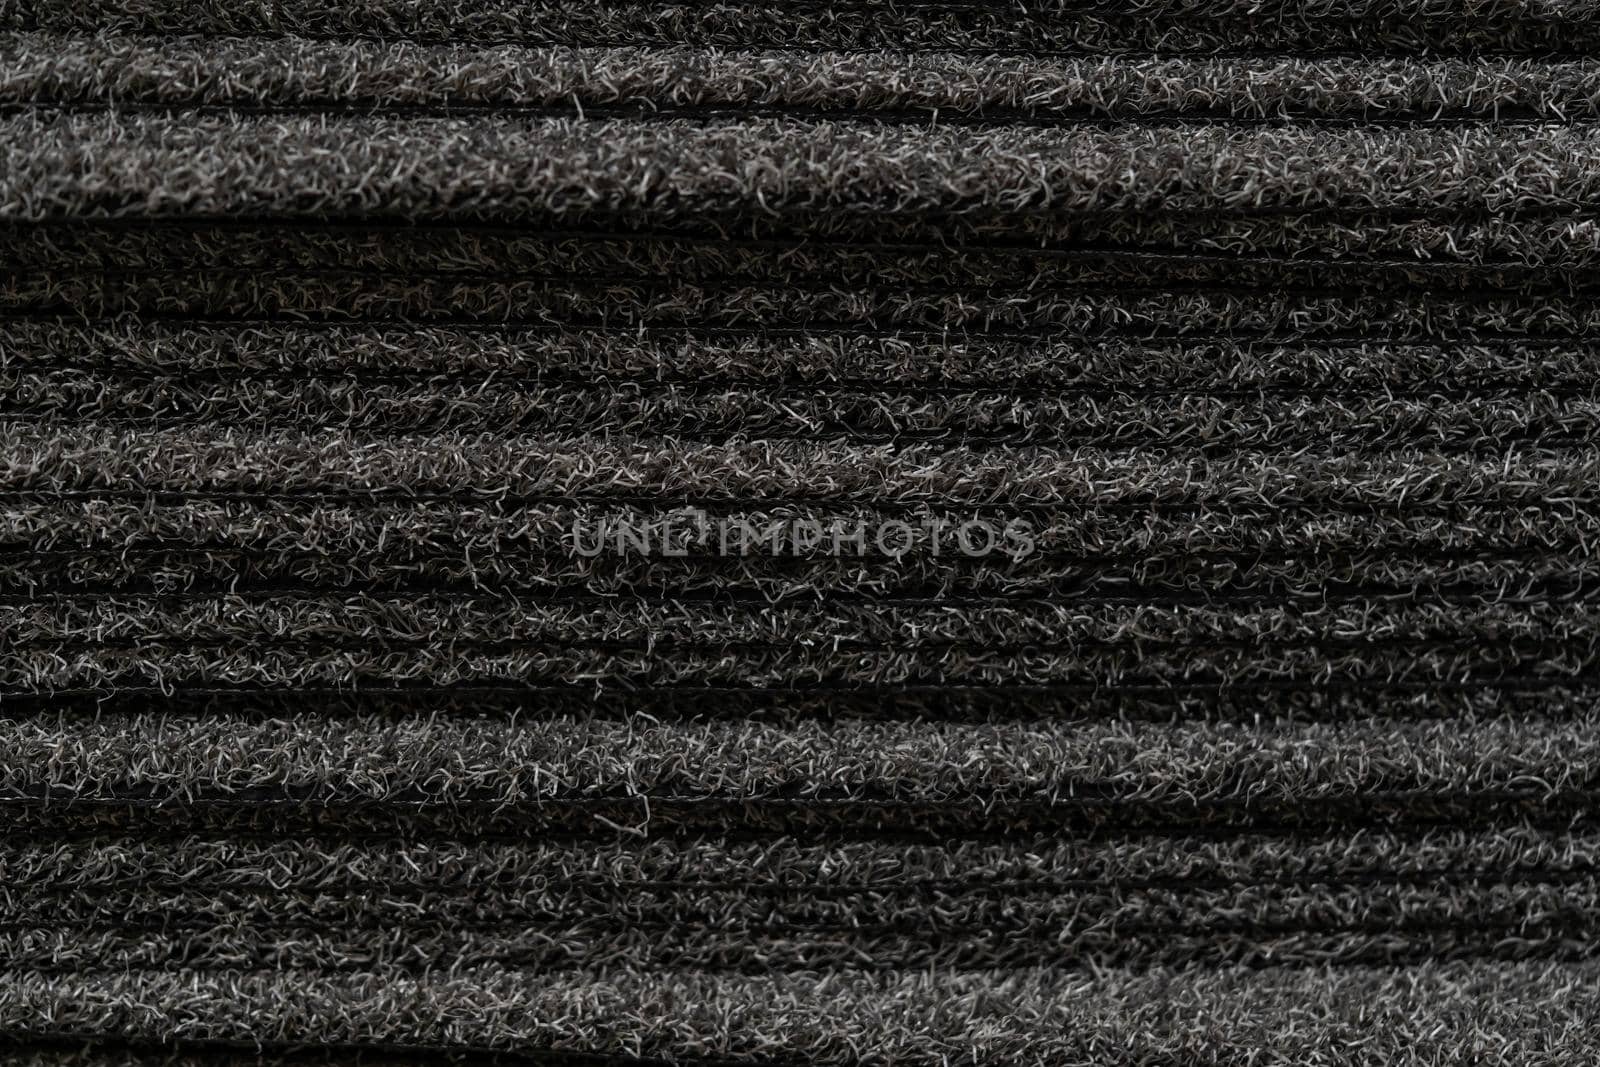 Black carpet for sale. Carpets placed on top of each other by billroque